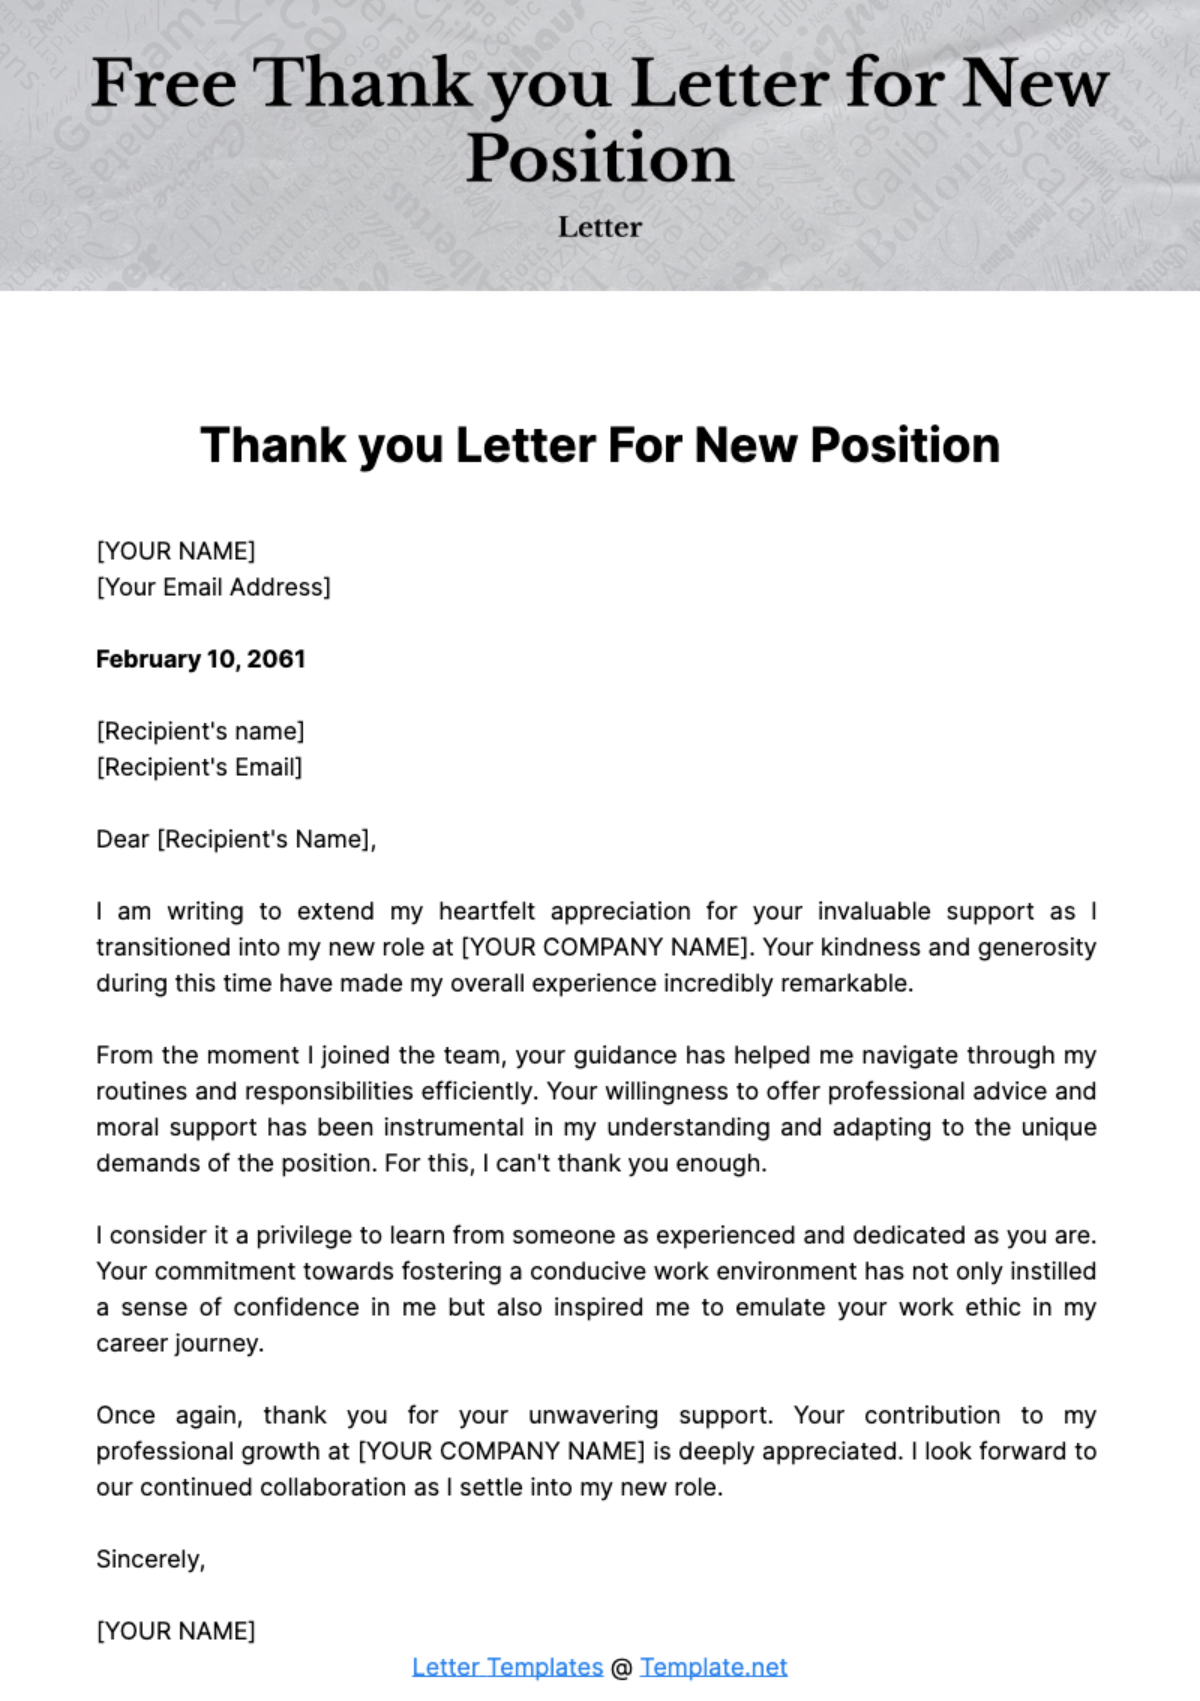 Free Thank you Letter for New Position Template